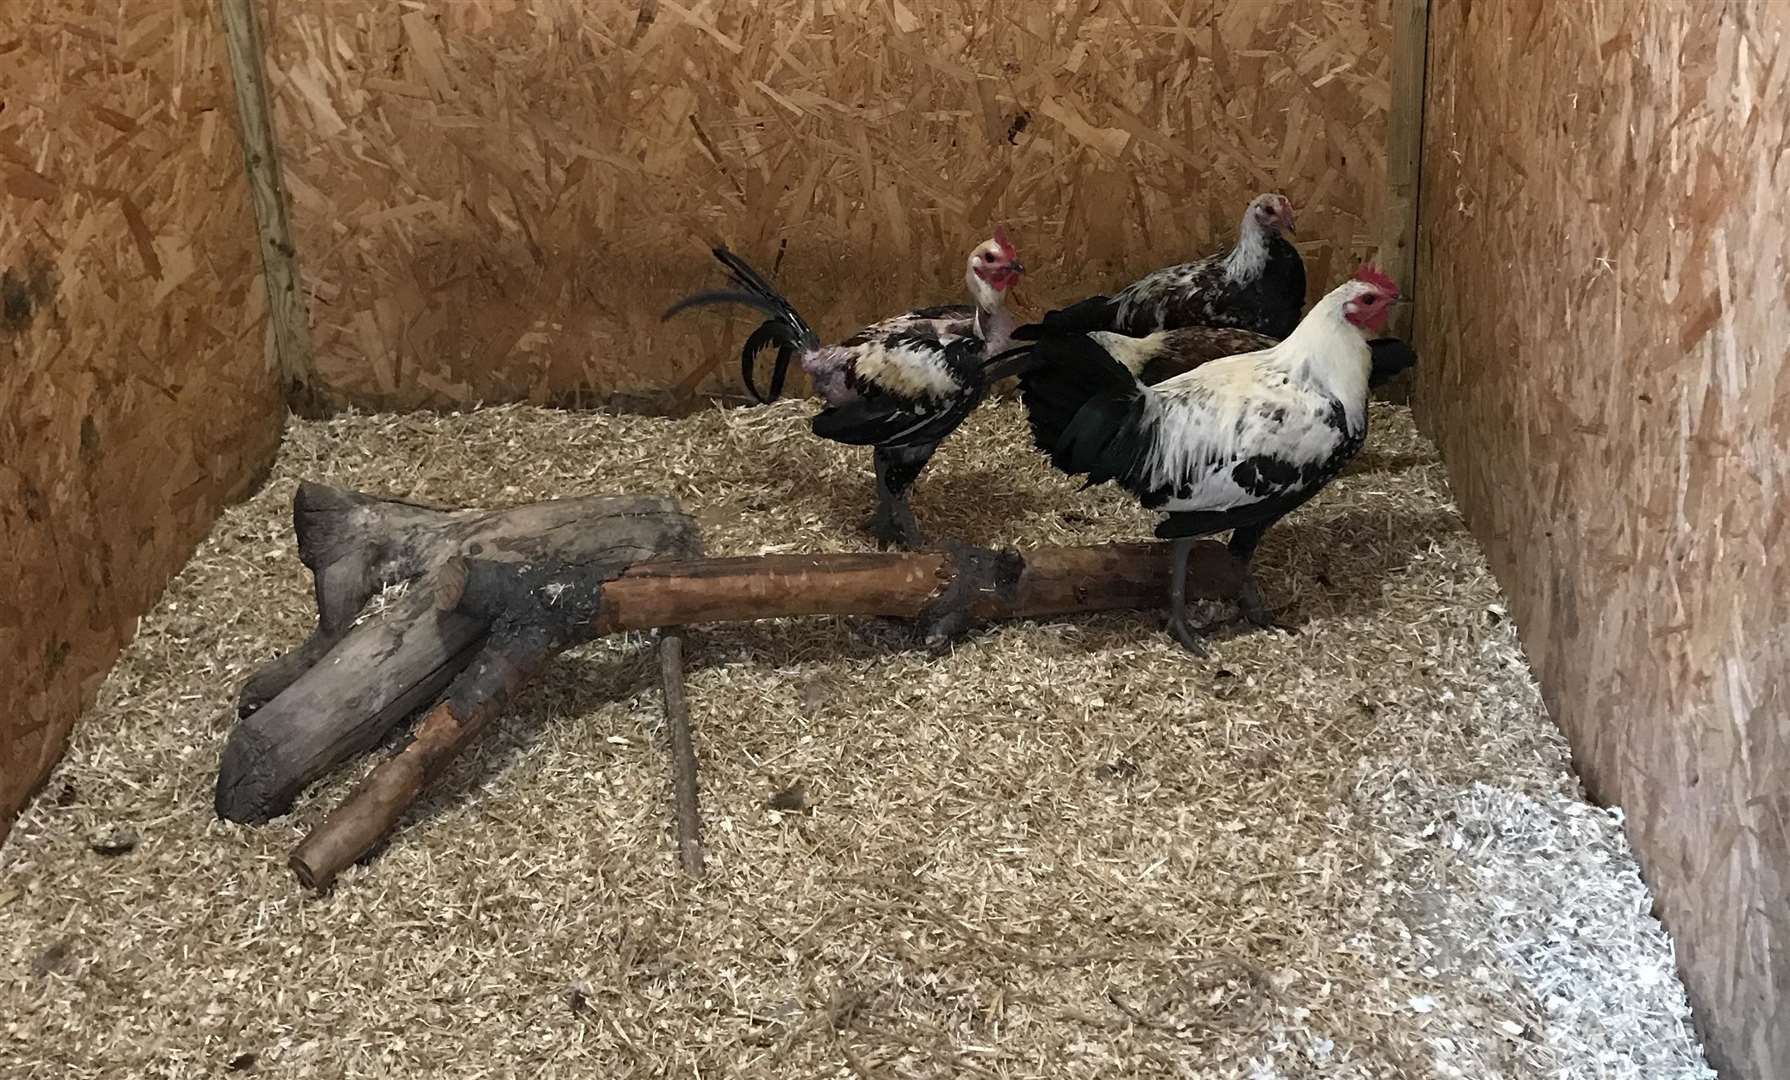 Some of the chickens - others could still be on the loose